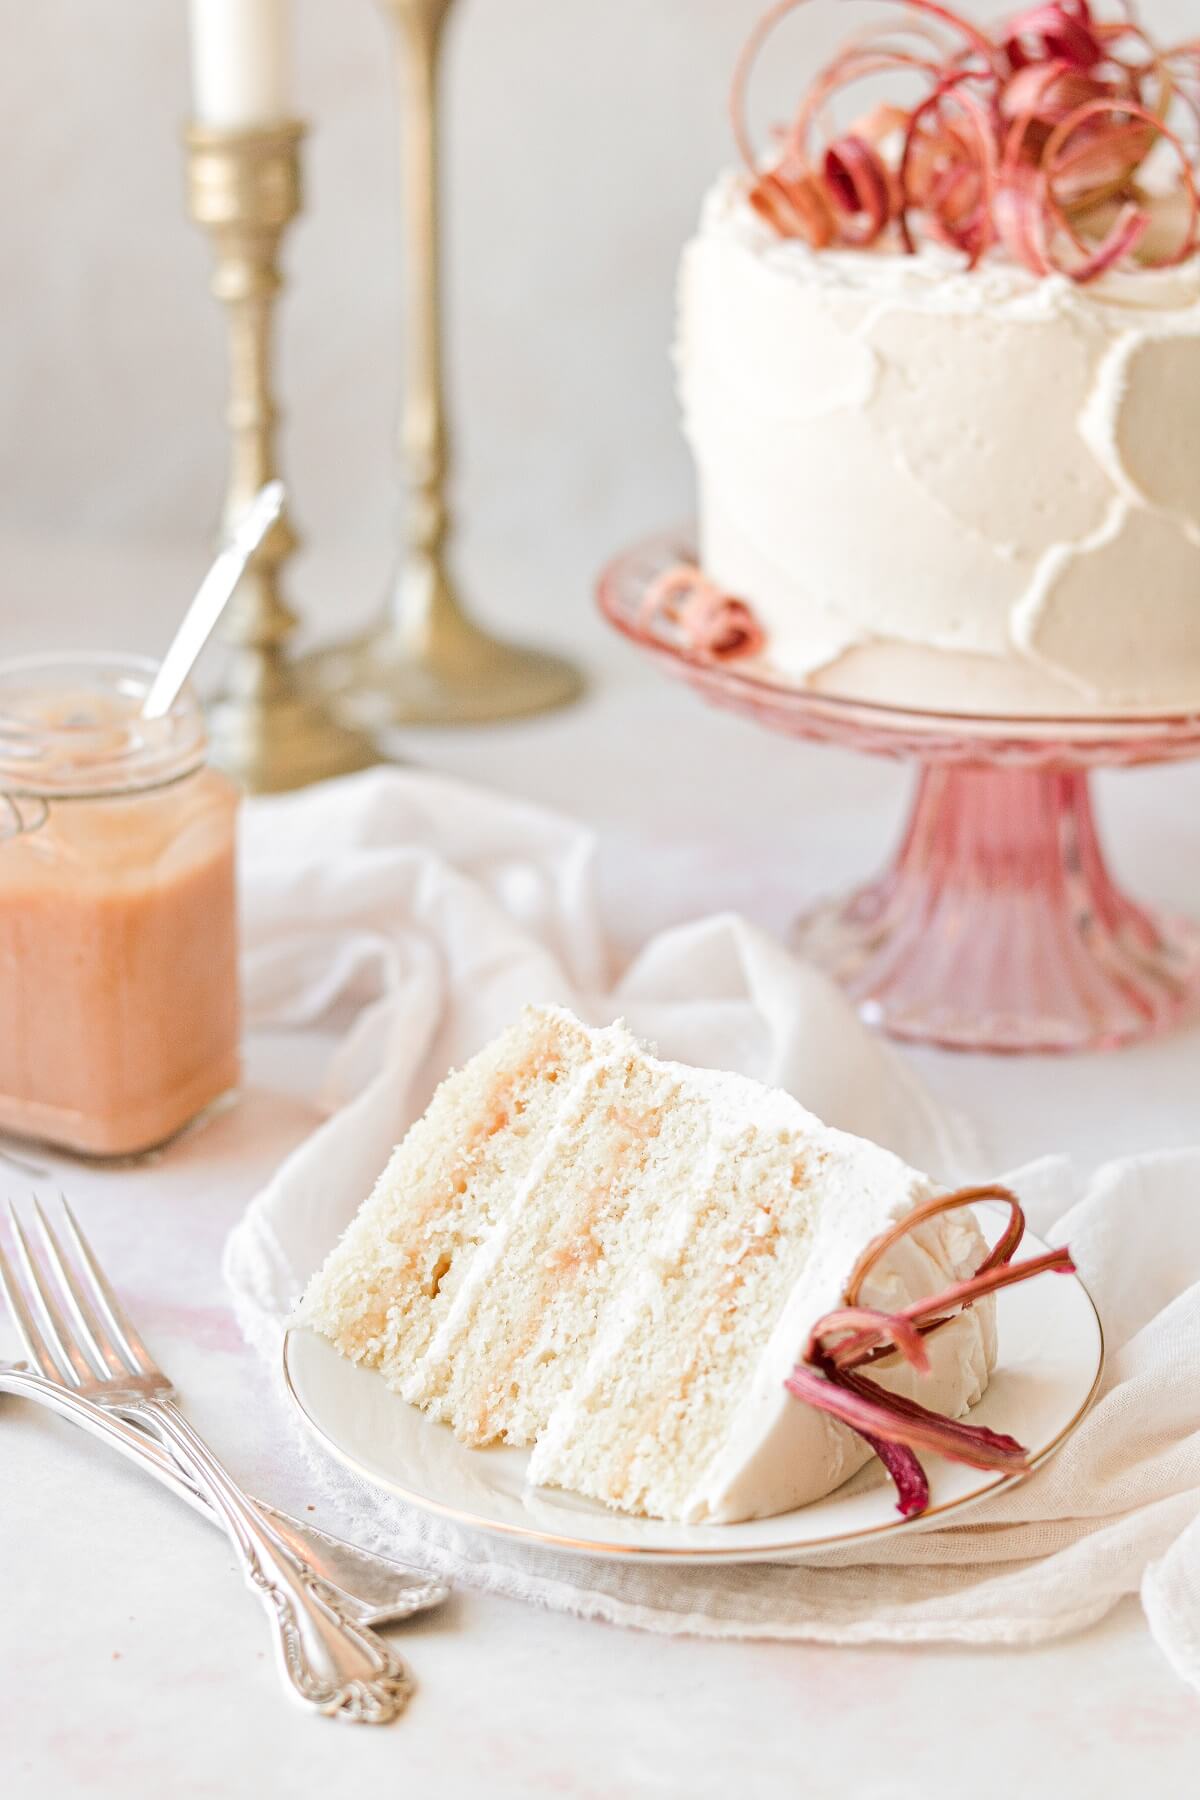 A slice of vanilla rhubarb layer cake topped with candied rhubarb curls.